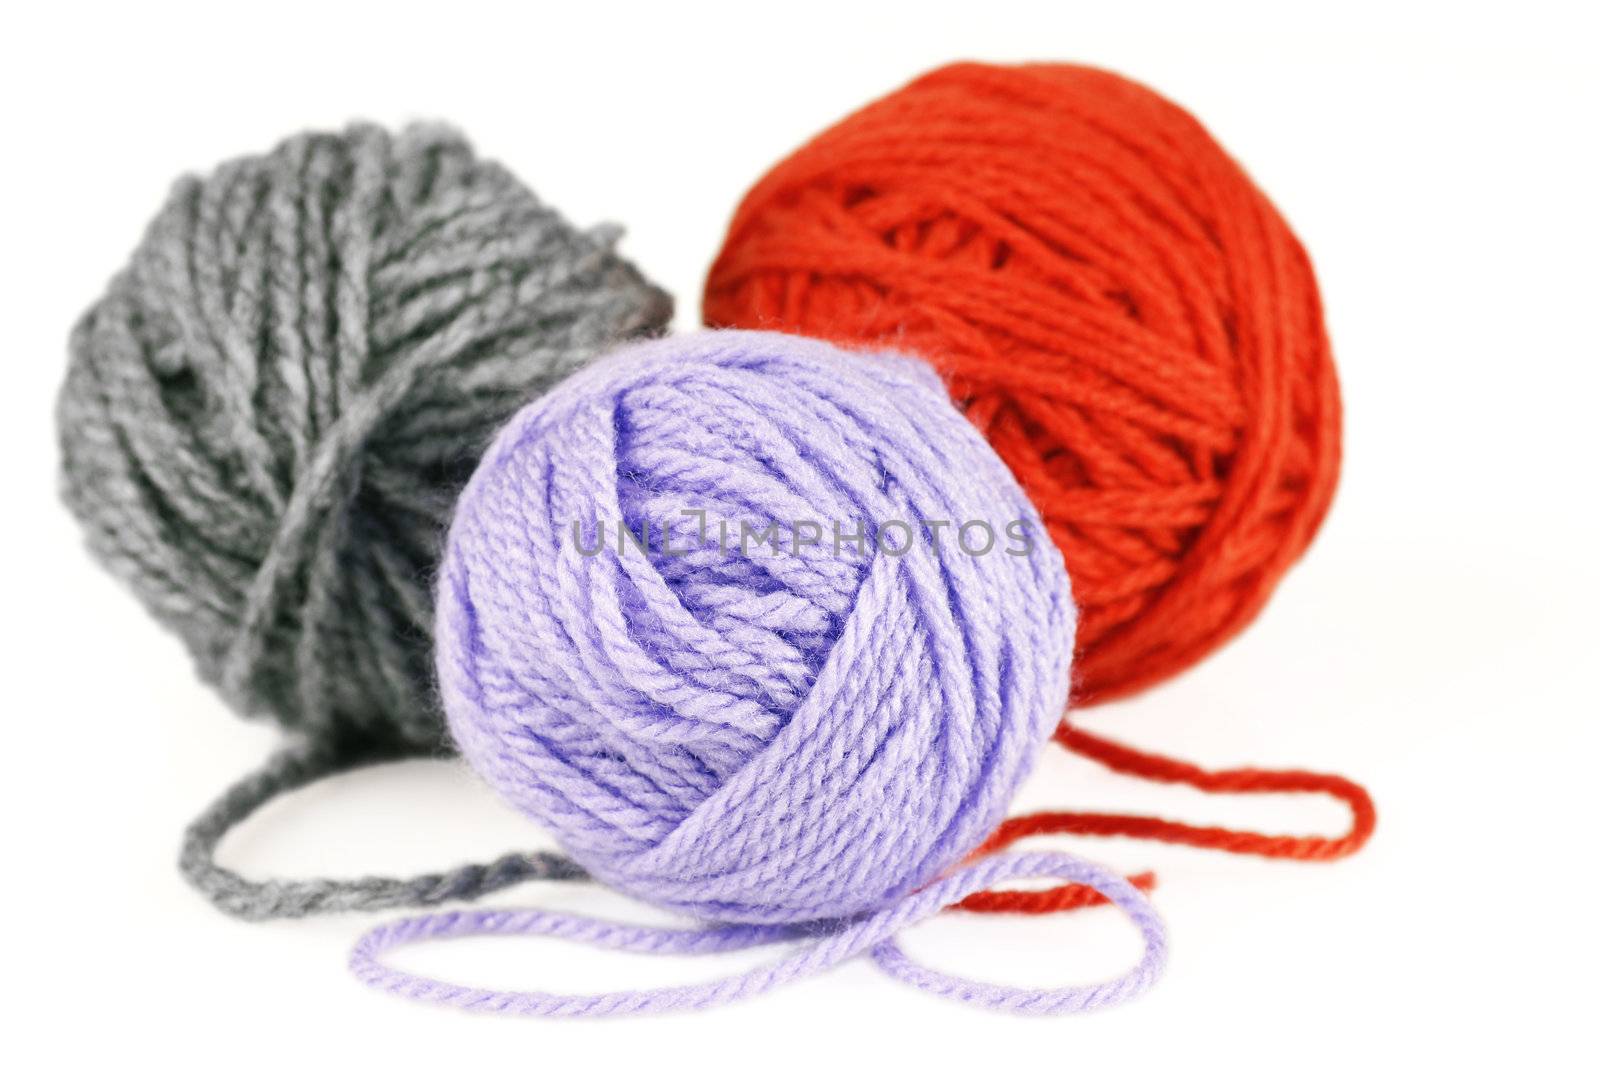 Balls of purple, orange and grey yarn or wool by Mirage3